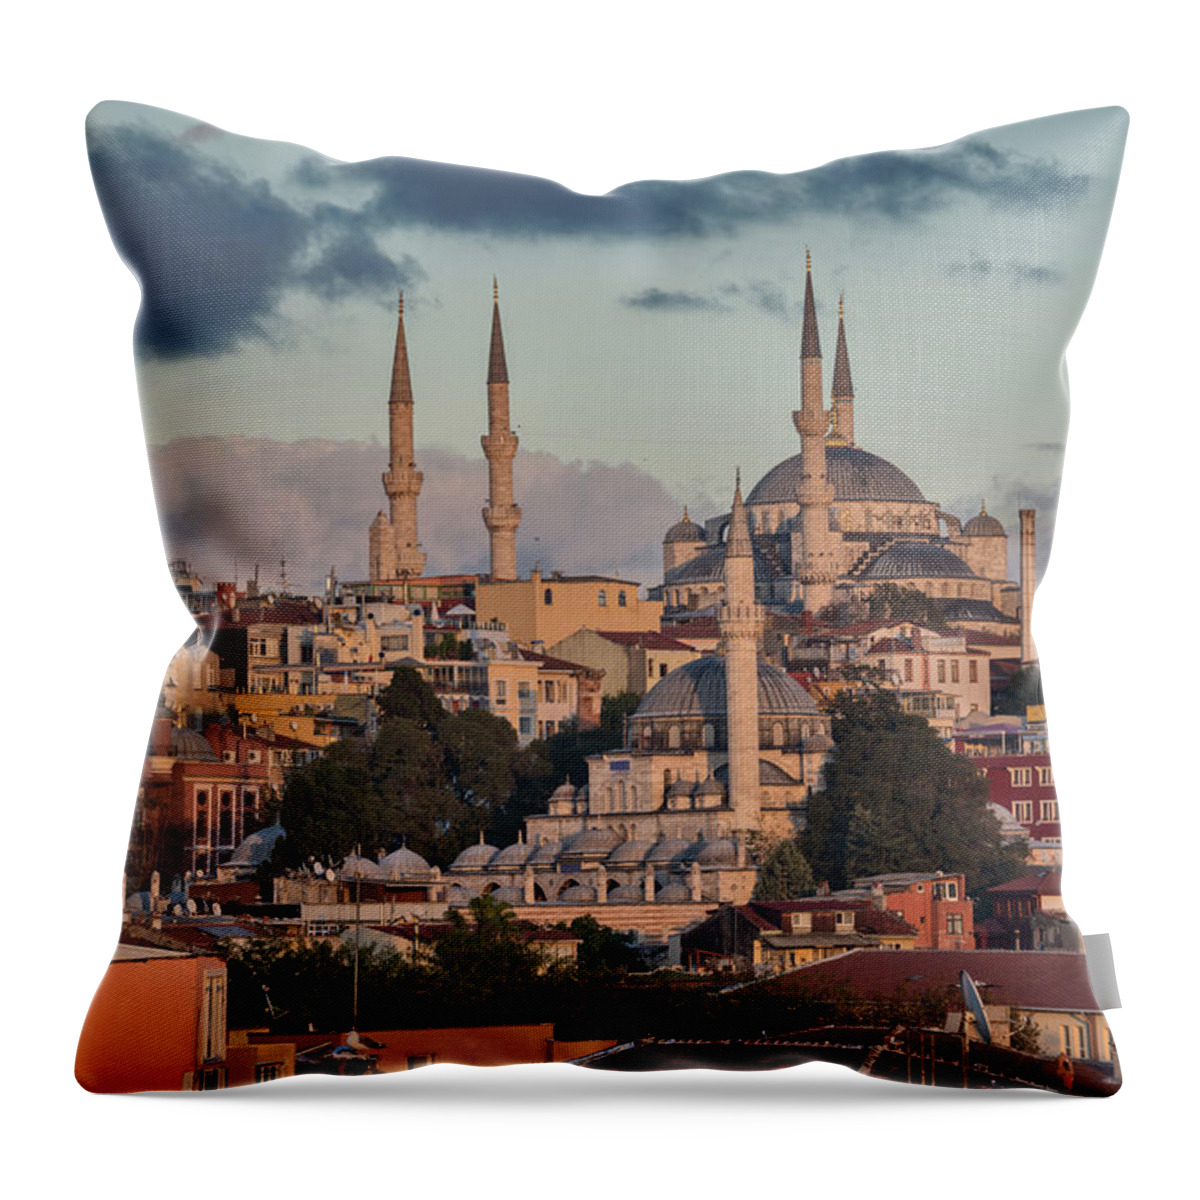 Istanbul Throw Pillow featuring the photograph The Blue Mosque At Sunset by Salvator Barki